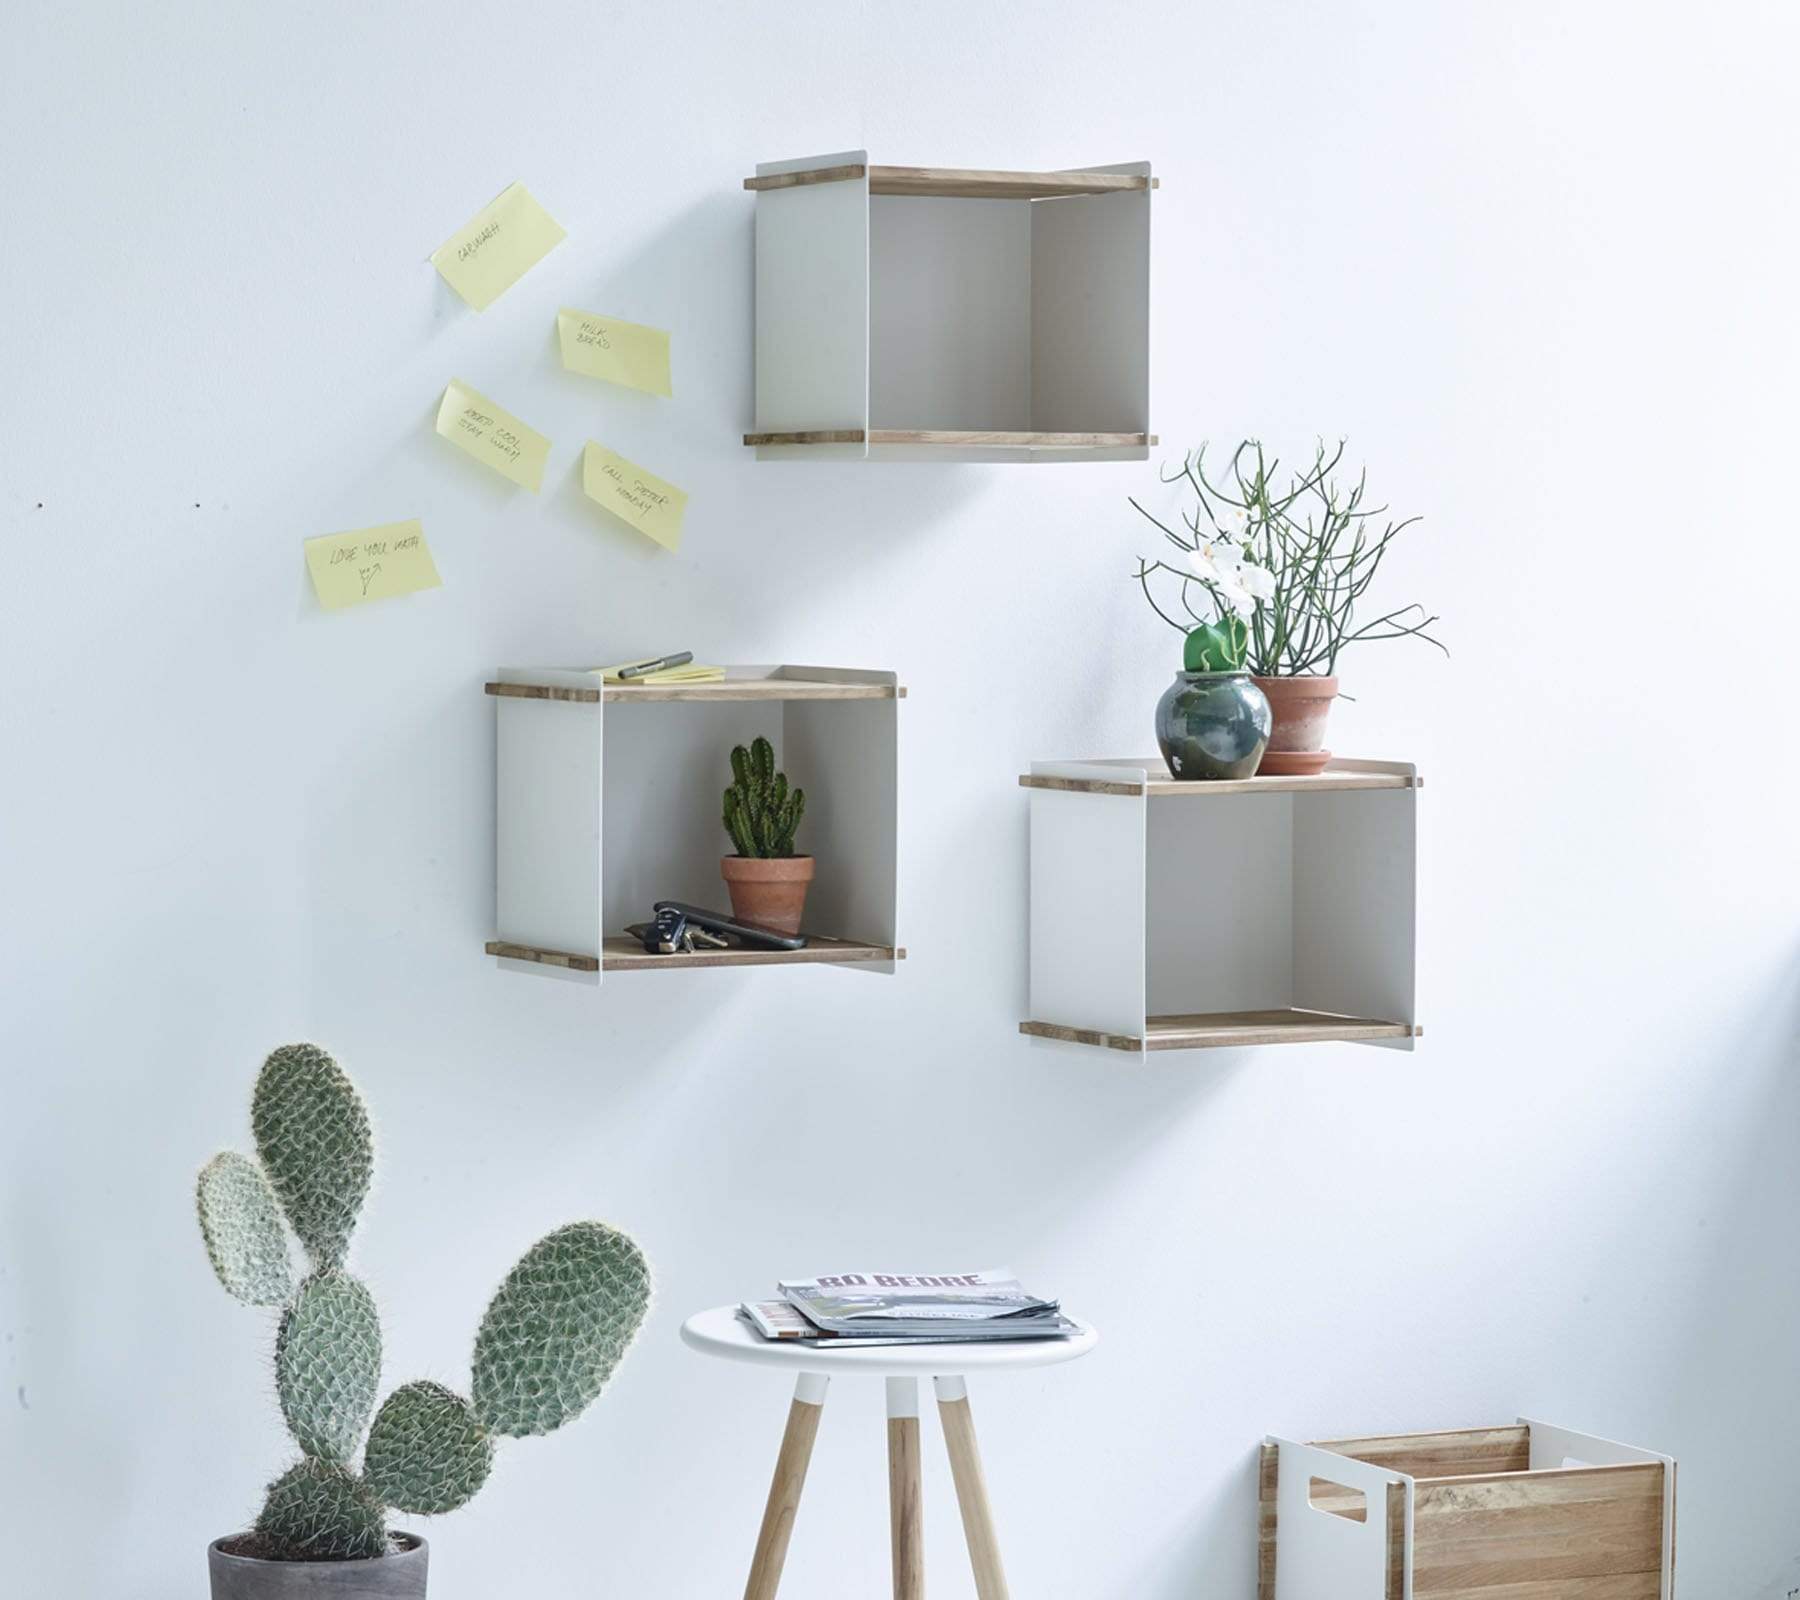  Boxhill's white Wall-mounted Teak Wood Square Shelves mounted on white wall with cactus plants, white round side table and teak box